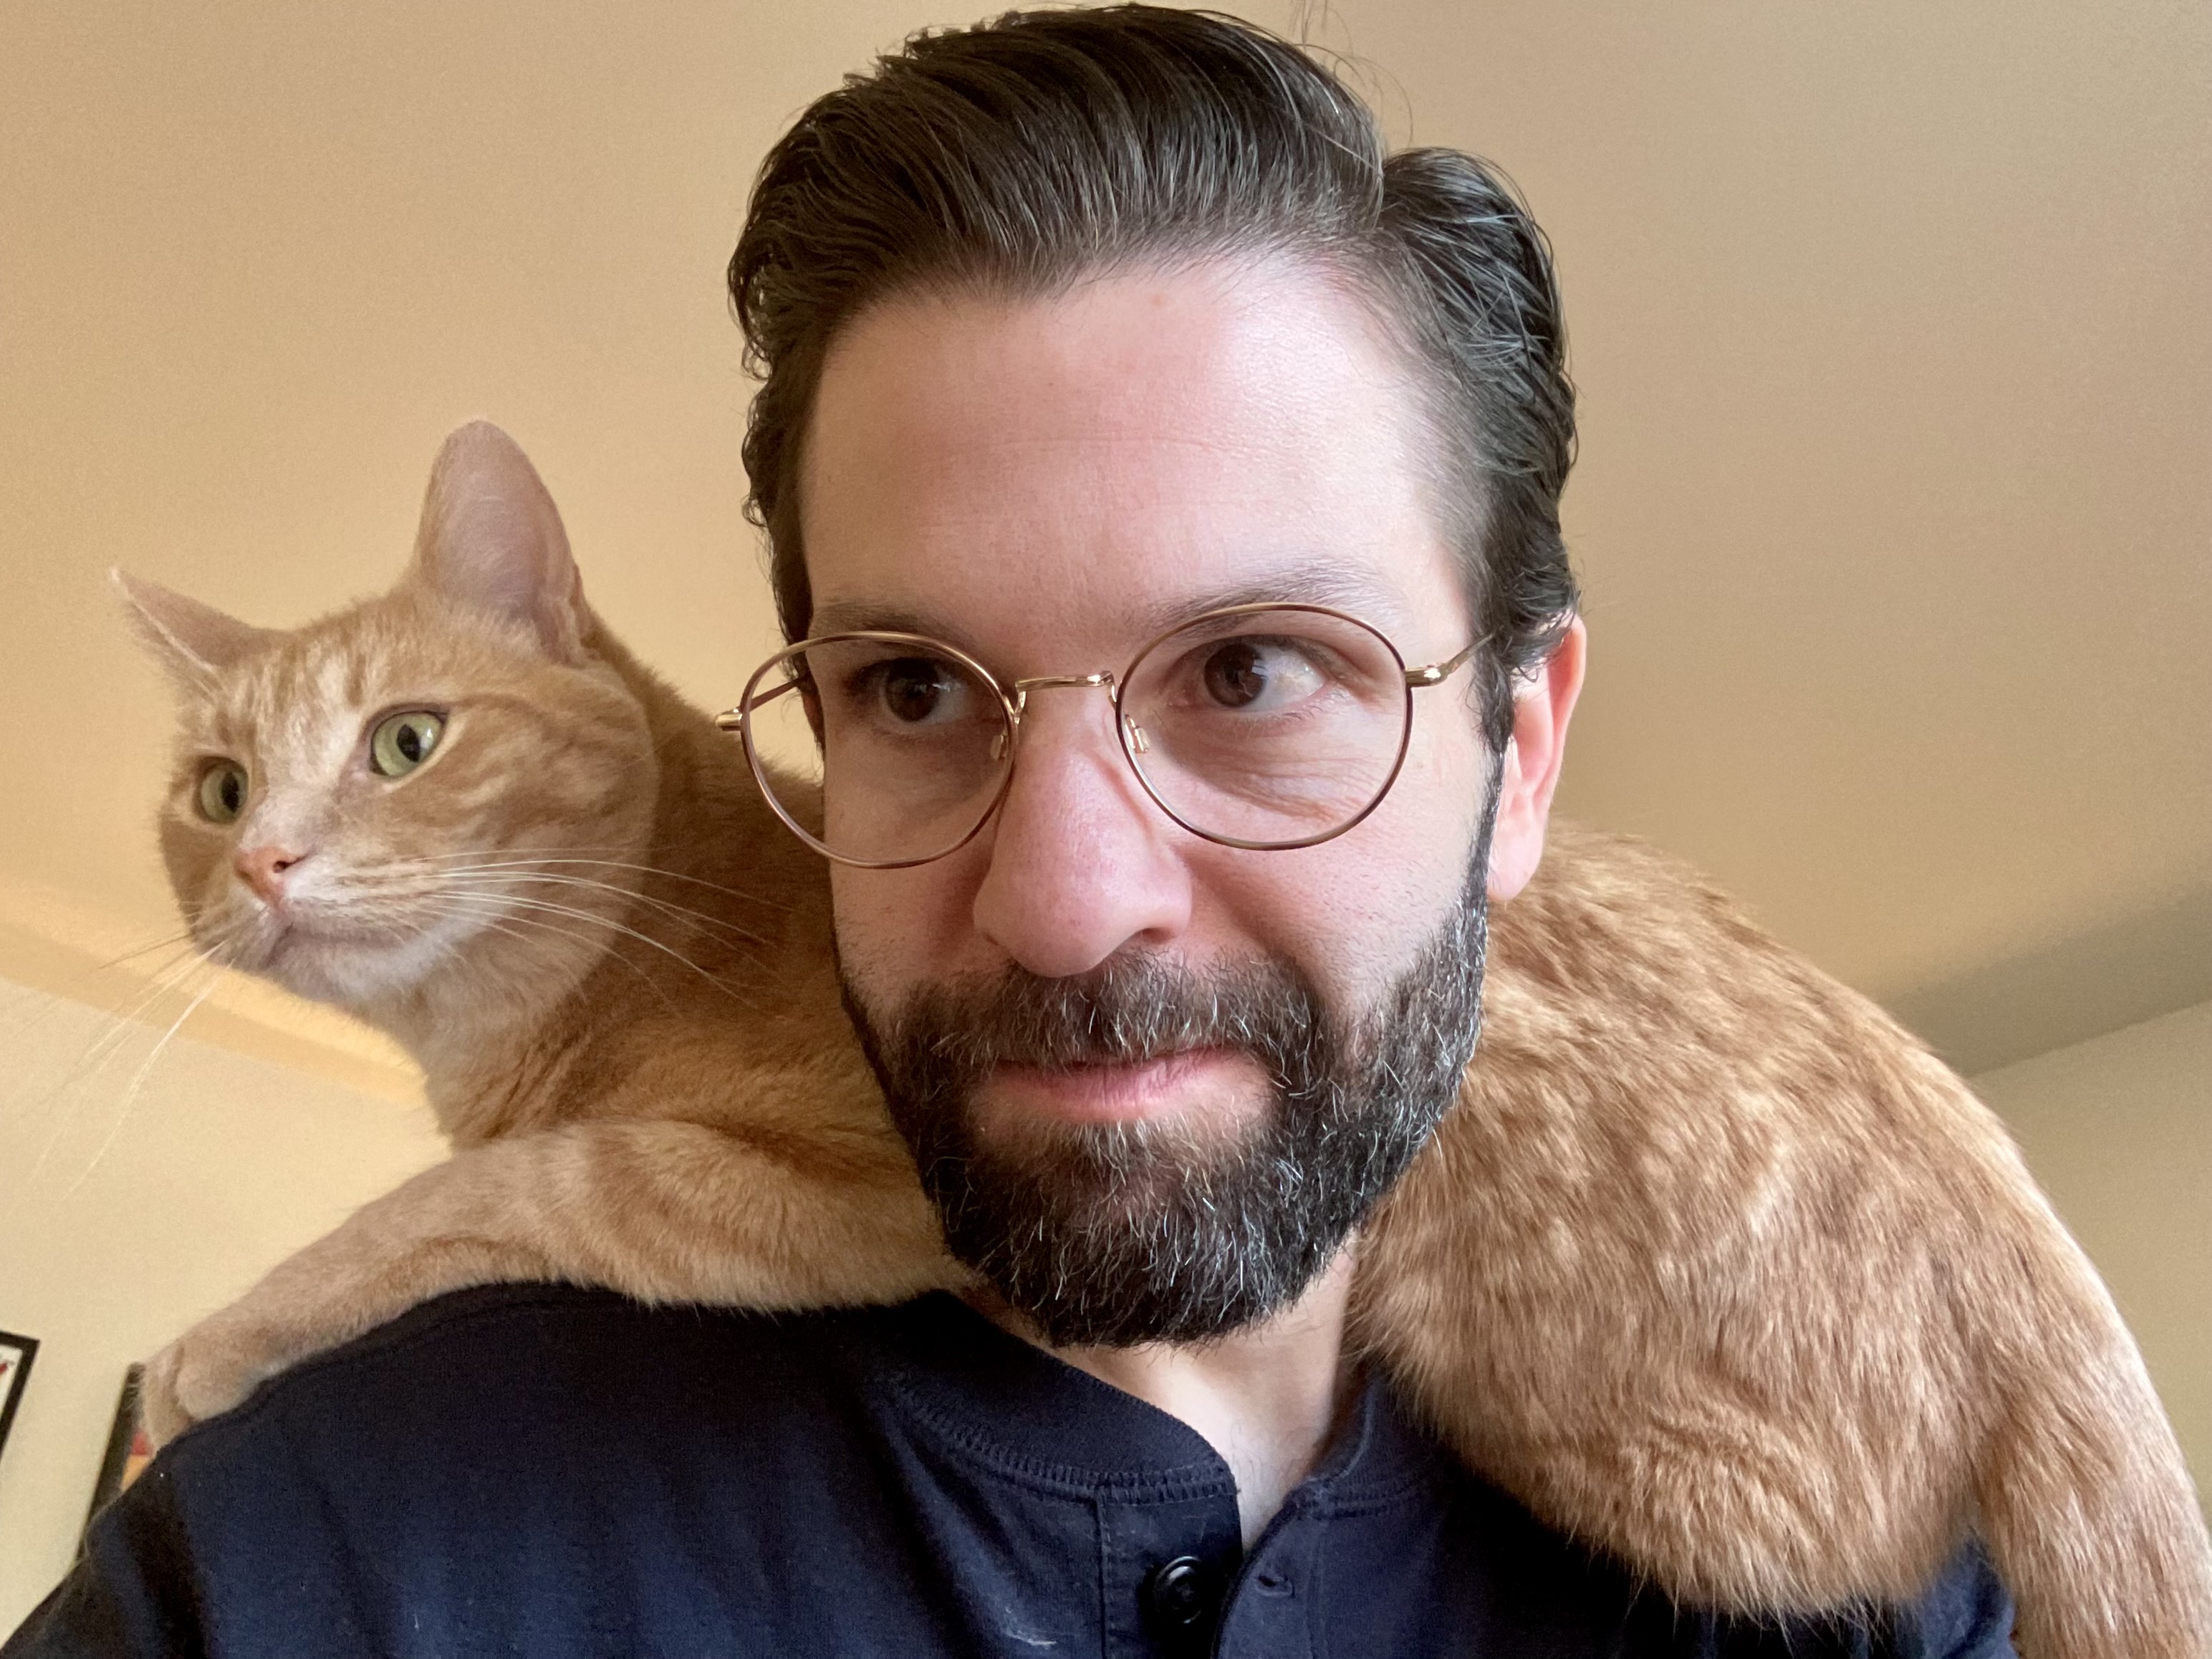 A portrait of me, with Teddy, an orange tabby cat, sitting across my shoulders. I'm wearing a dark blue shirt and gold-rimmed glasses.